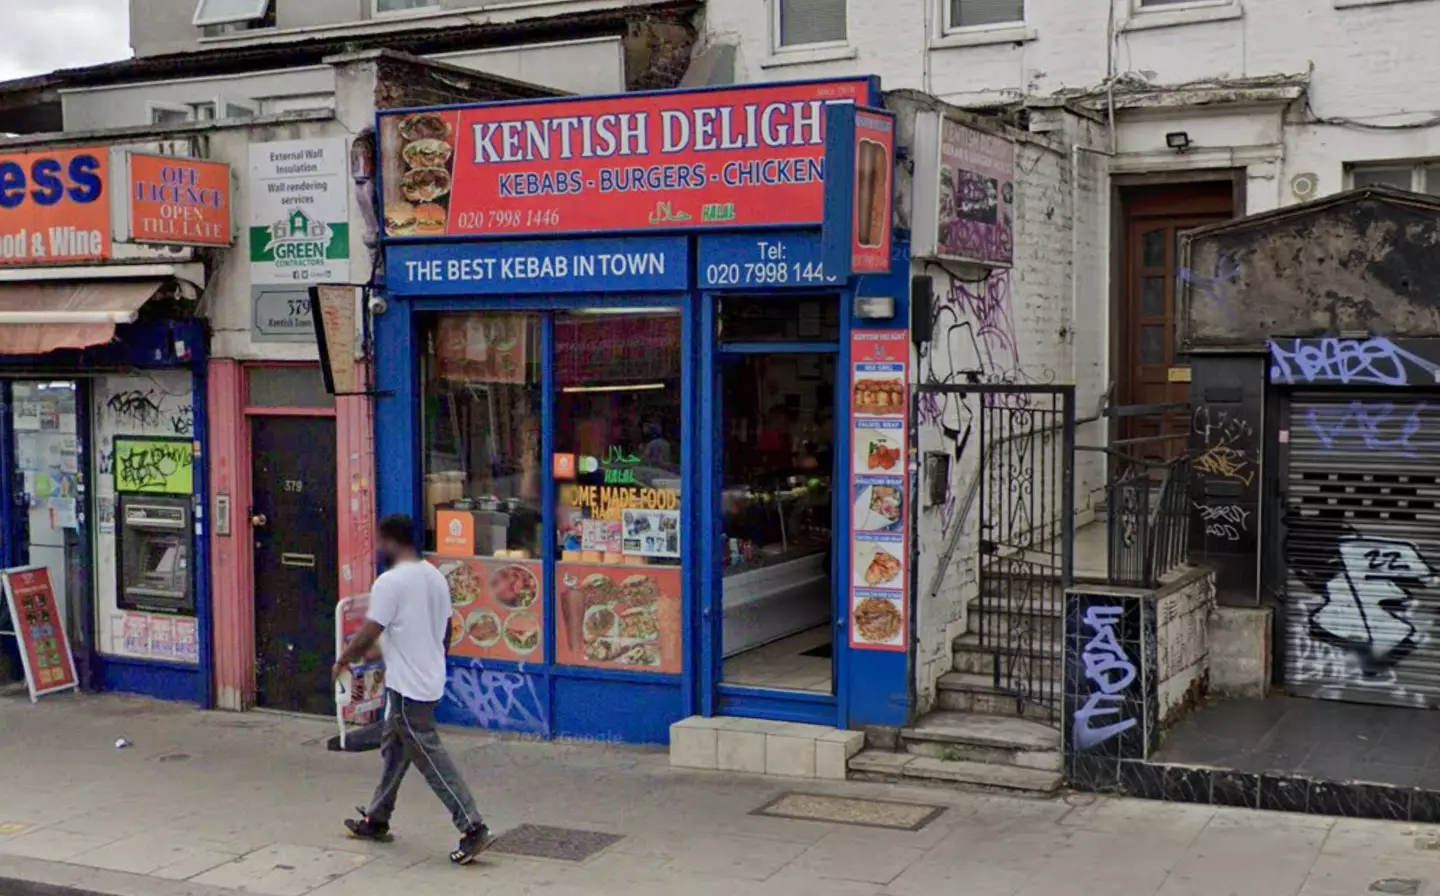 The North London takeaway is apparently one of the singer's favourite. (Google Maps)